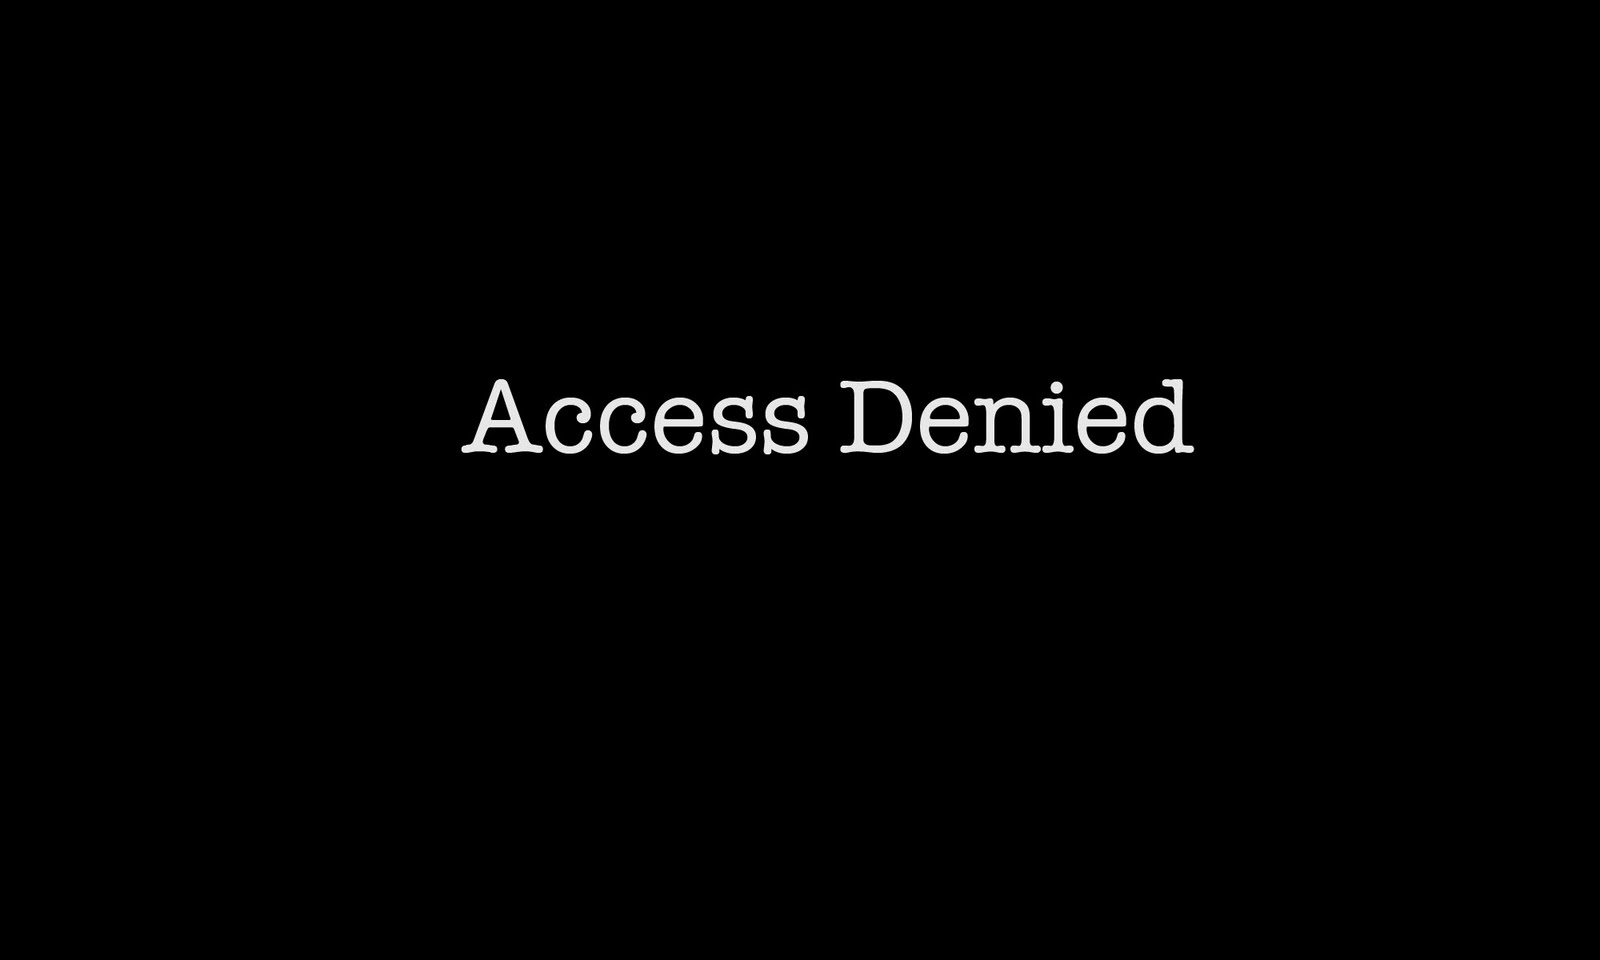 Access Denined